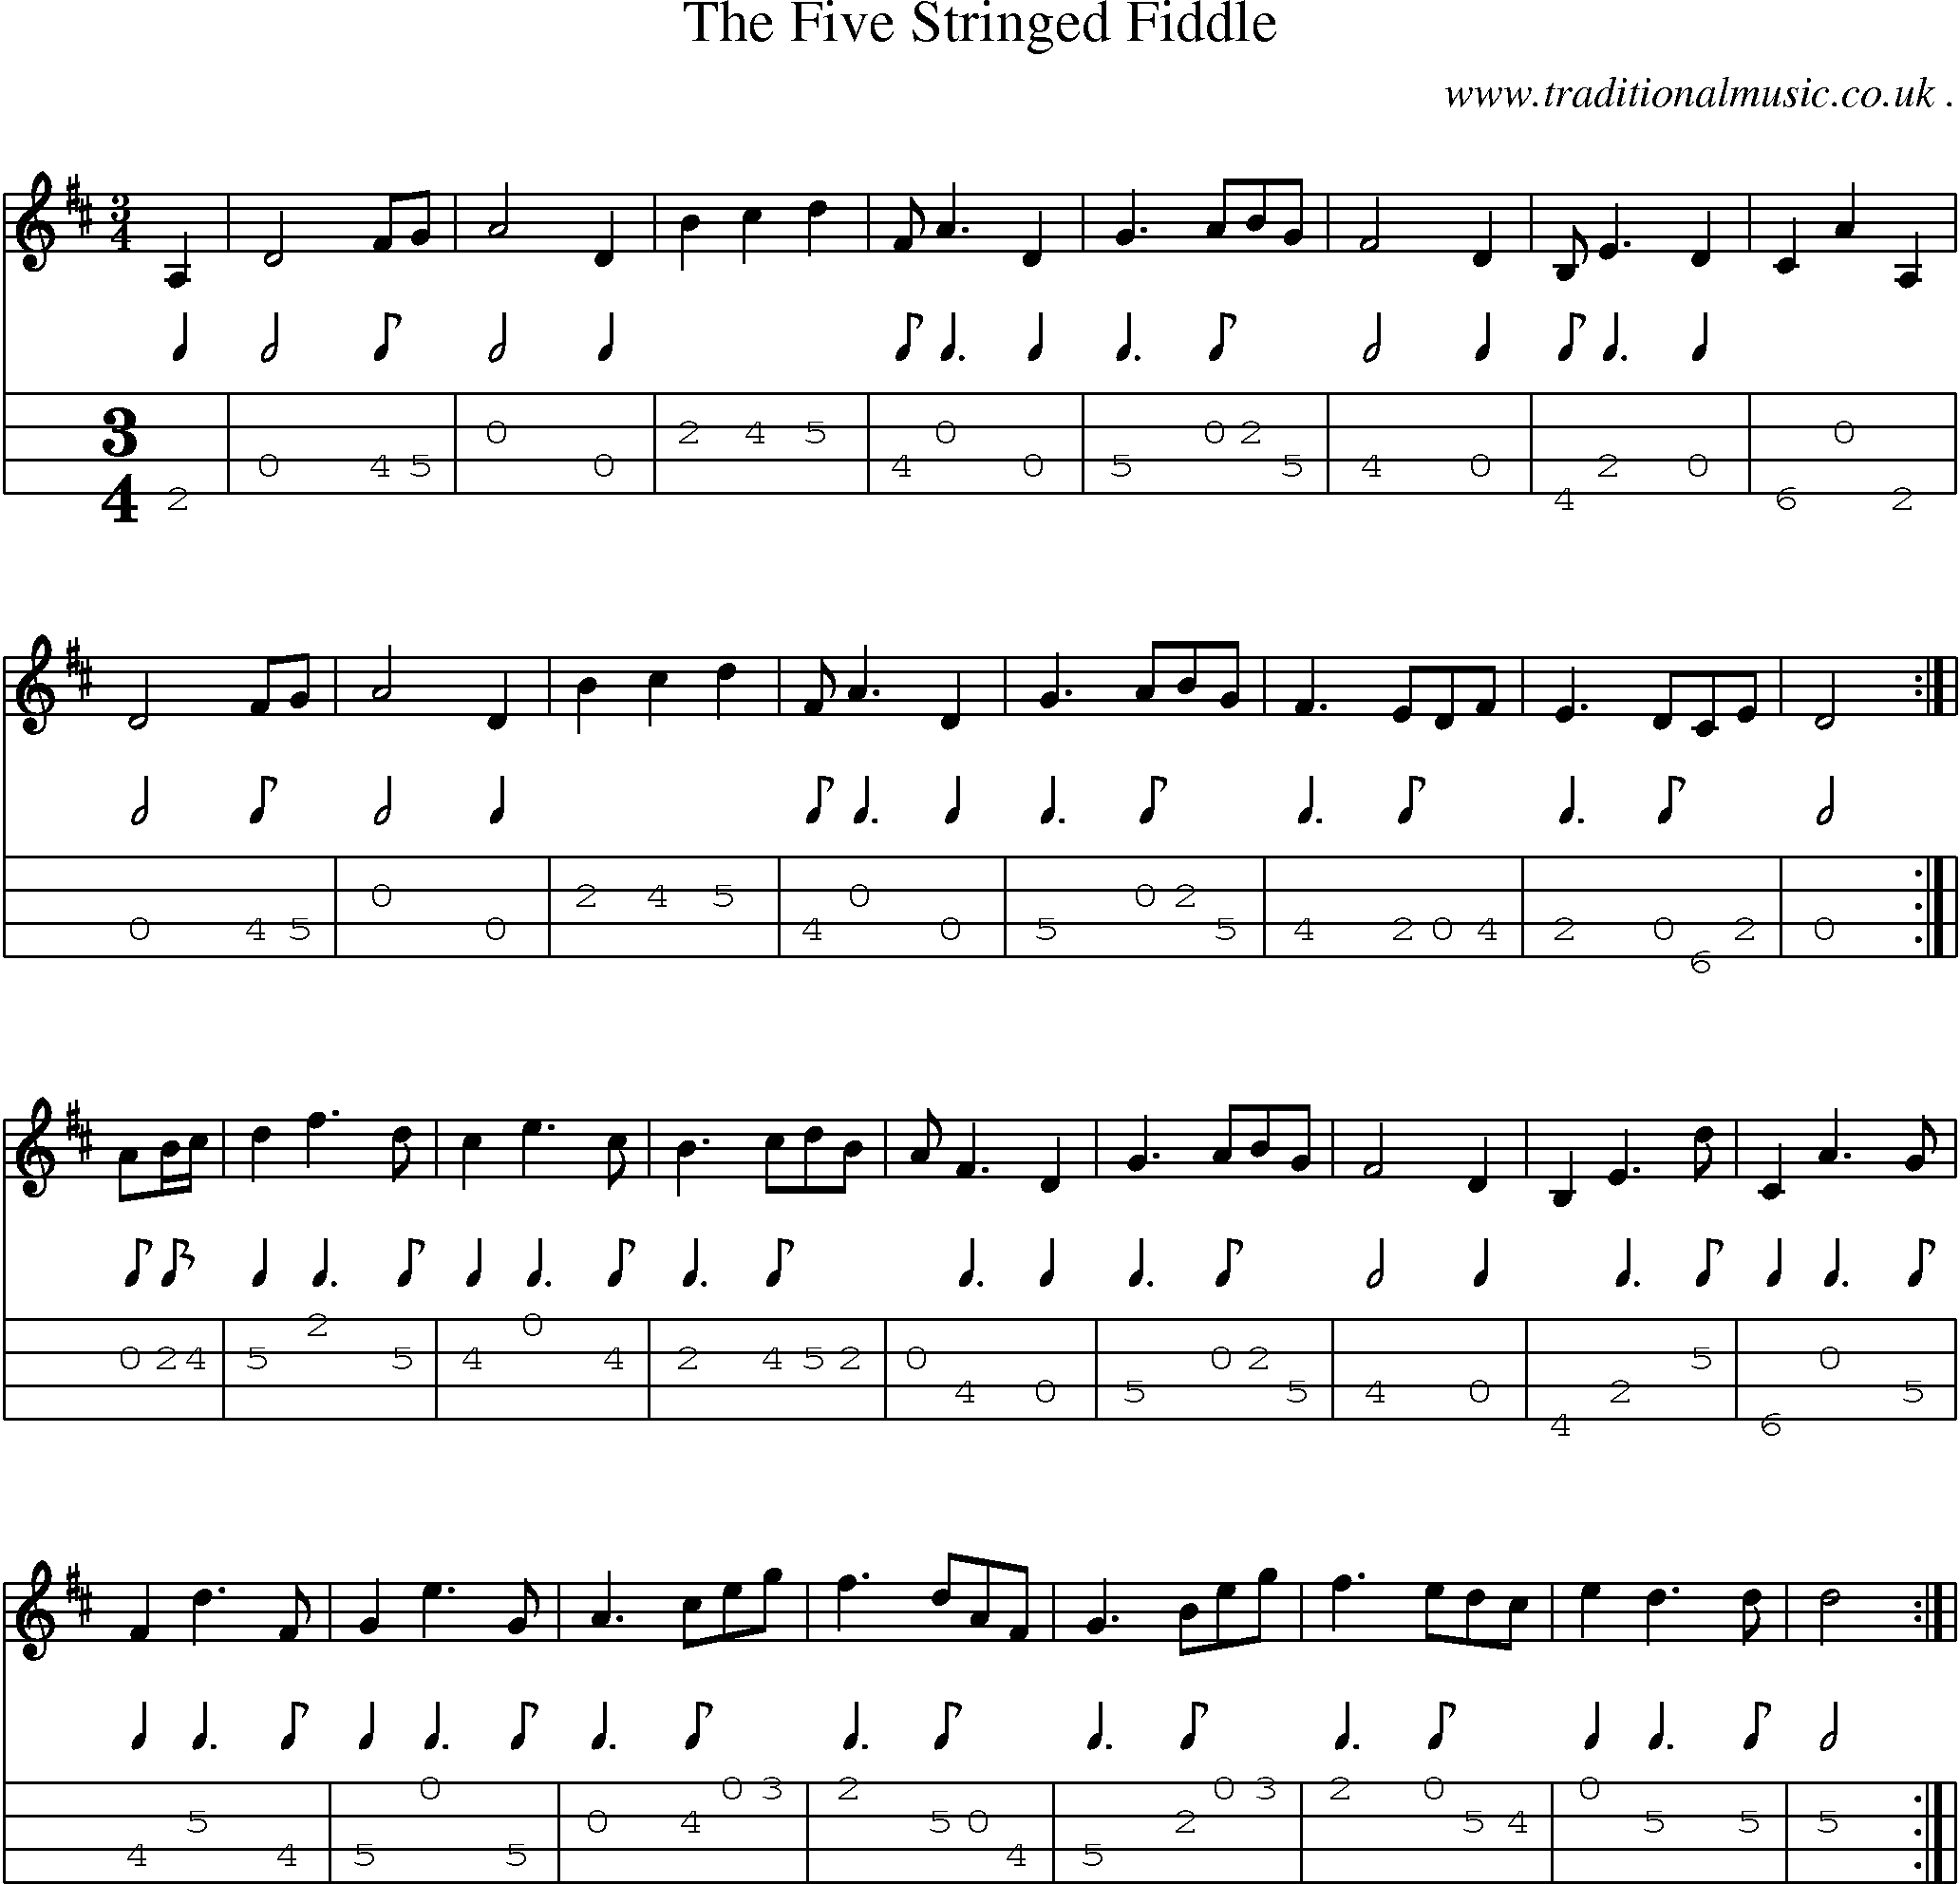 Sheet-Music and Mandolin Tabs for The Five Stringed Fiddle